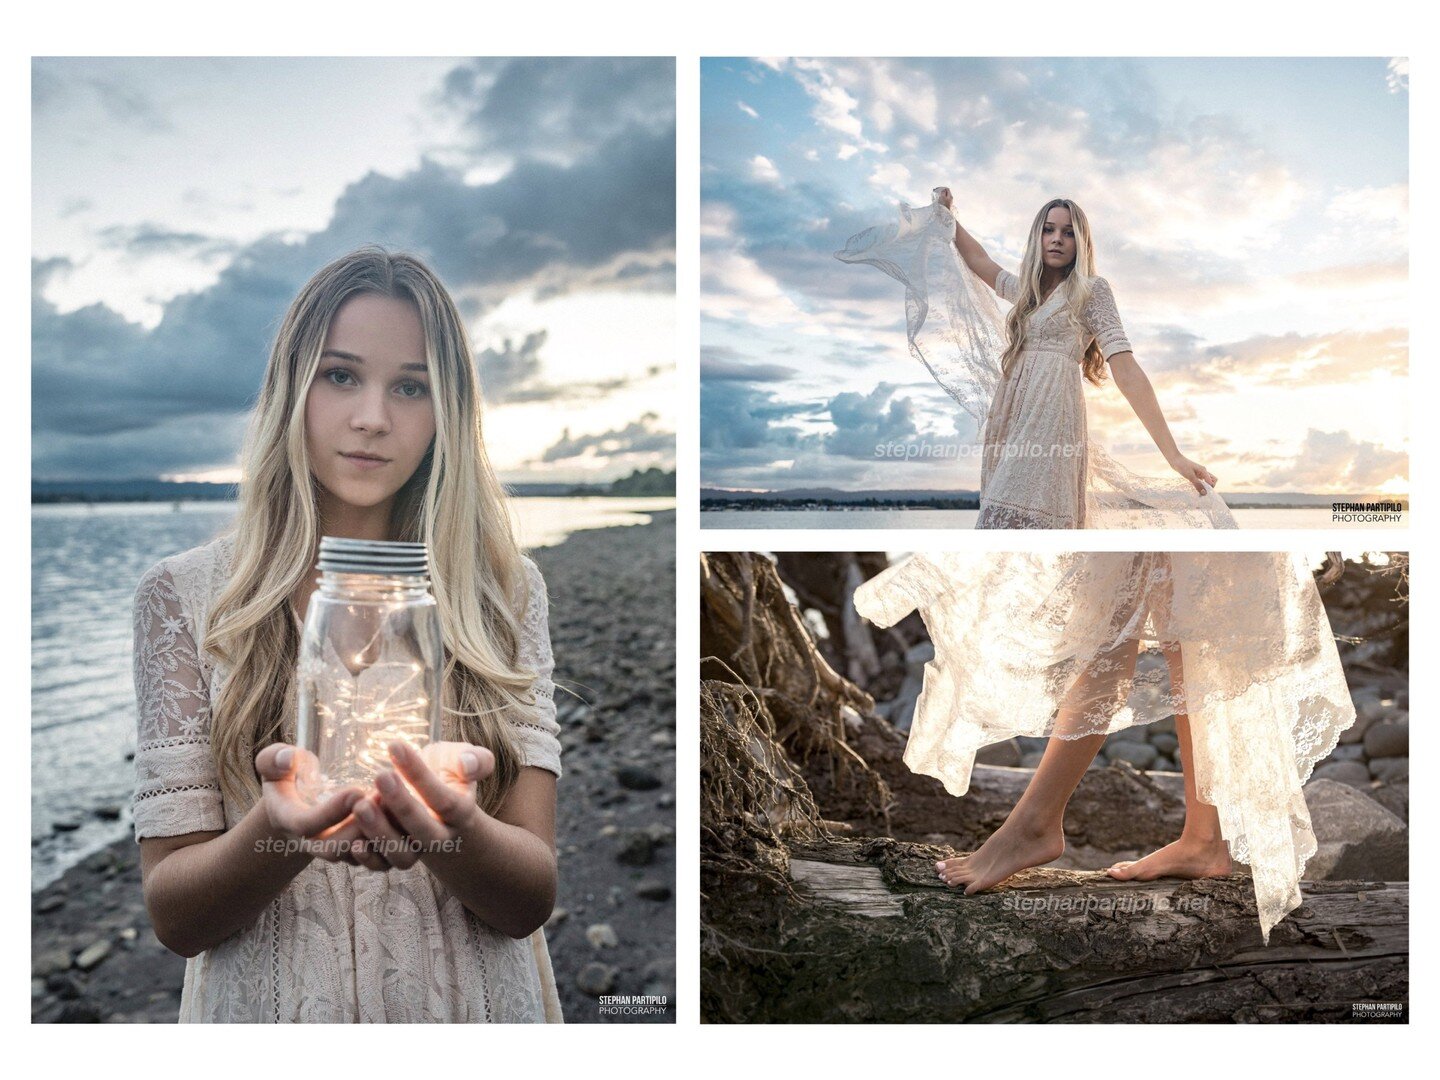 https://www.stephanpartipilo.net/Teen-Model-With-Light-Pink-Dress-And-Golden-Hour-Sunset-by-Stephan-Partipilo_p_29.html
Featured: Anonymous
Photographer: Stephan Partipilo LLC.
Camera: 5D Mark IV.
Lens: 24-70mm.
Lighting: Natural, mini LEDs.
Location